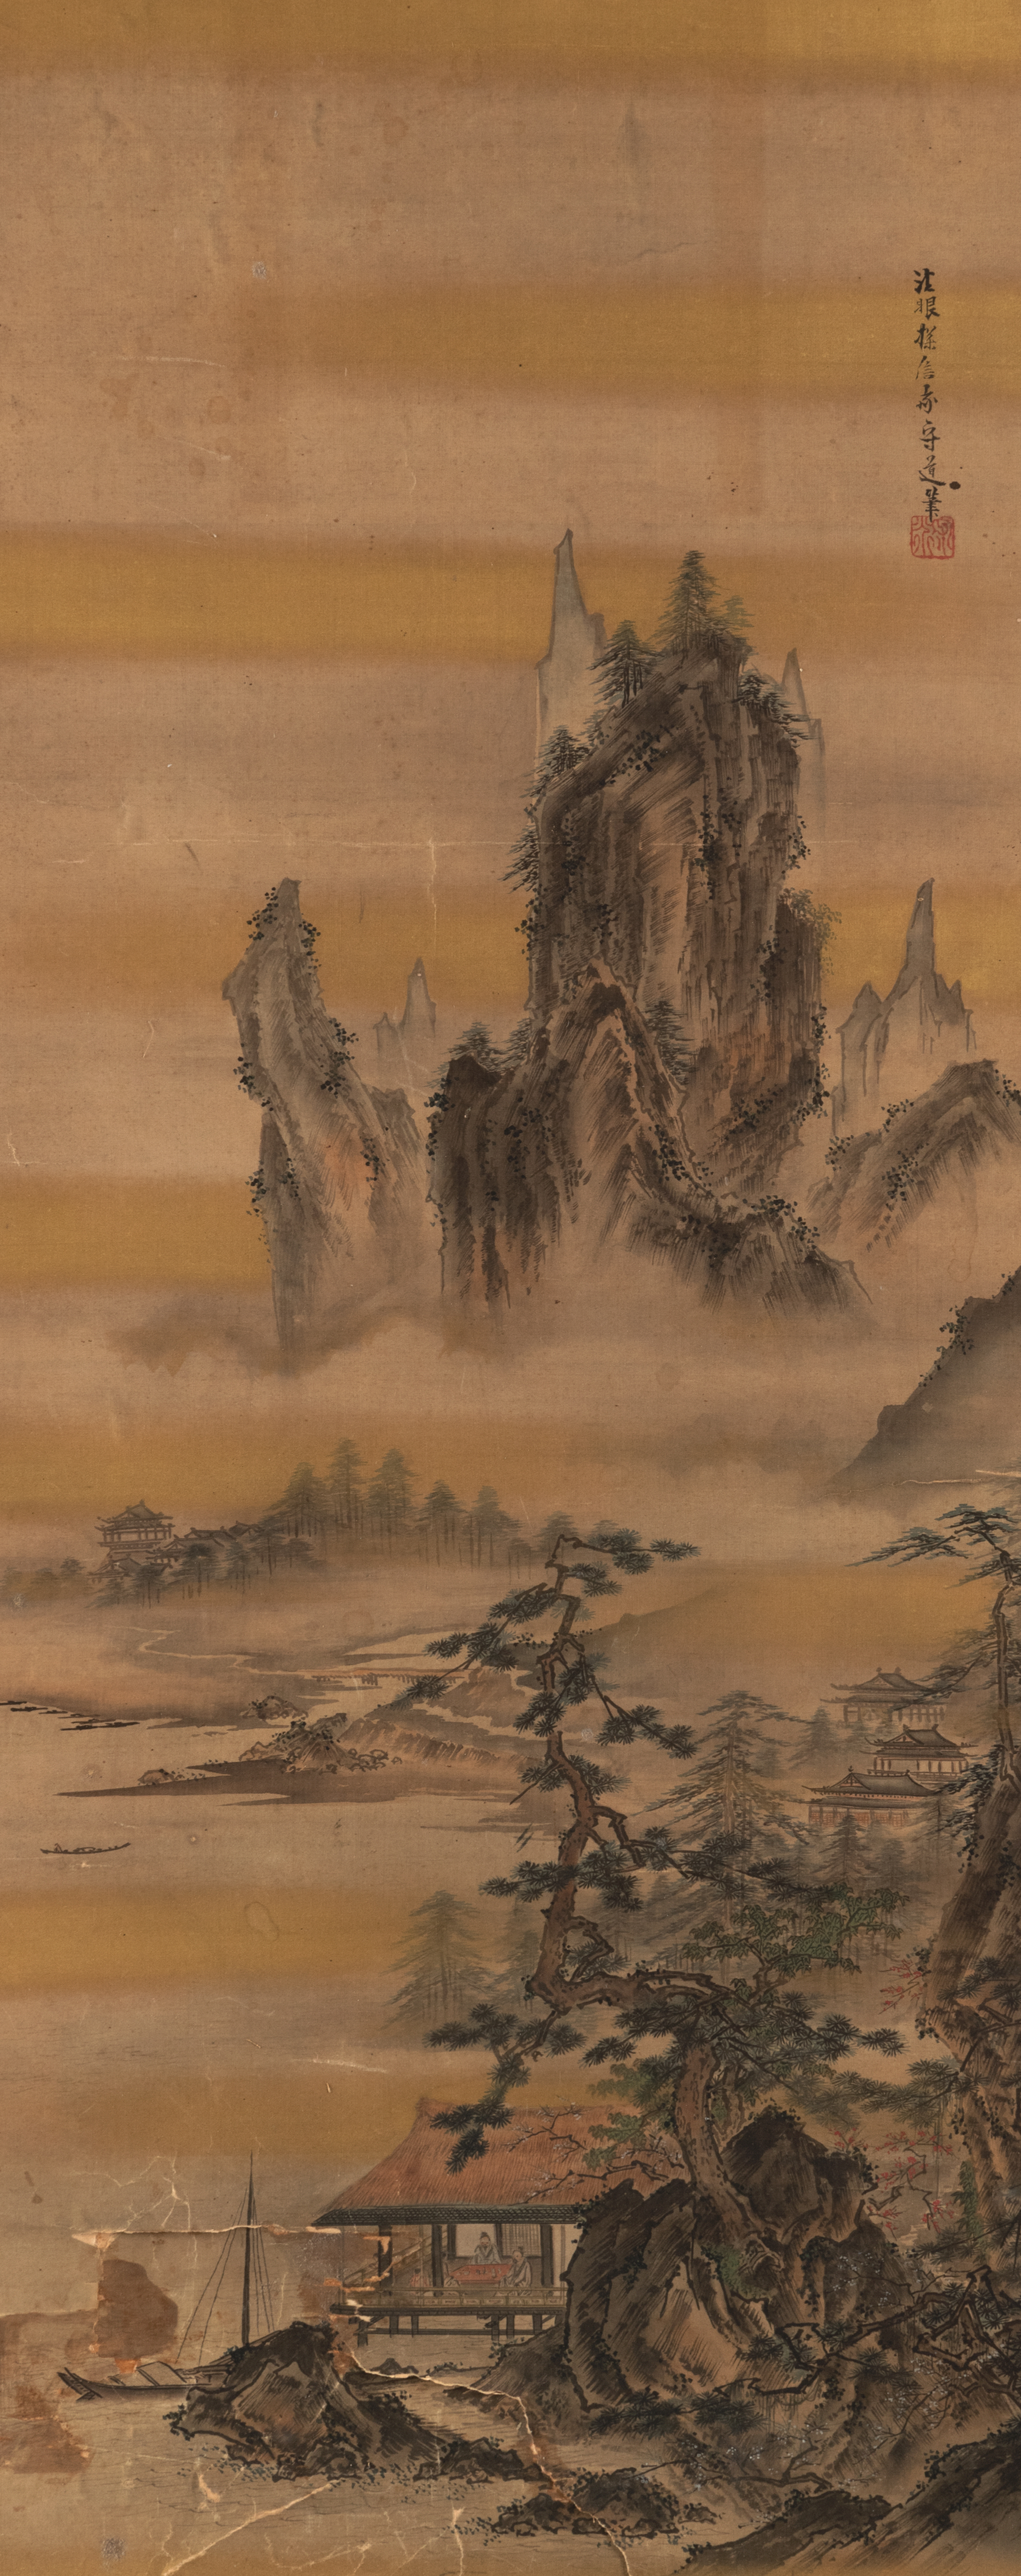 A HANGING SCROLL DEPICTING A LANDSCAPE WITH A SCHOLAR'S SUDIO AFTER KANO TANSHIN. INK AND COLORS ON